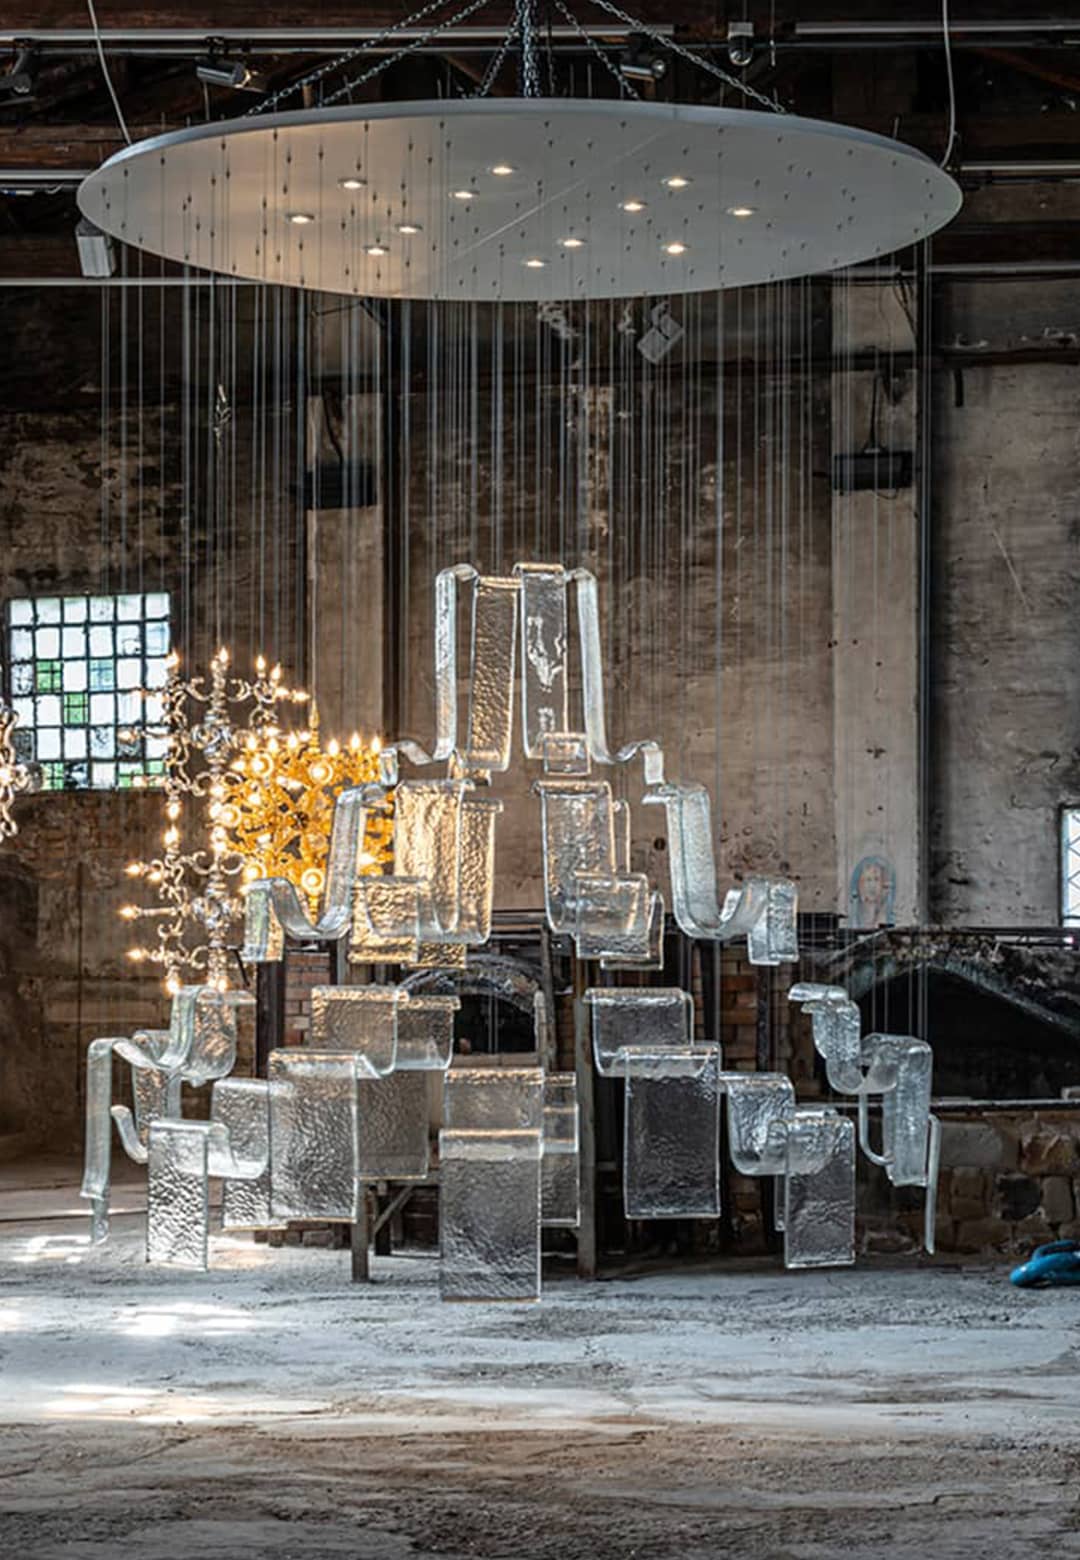 GLASS to GLASS exhibition, presented by WonderGlass and Berengo Studio, takes centre stage at The Venice Glass Week